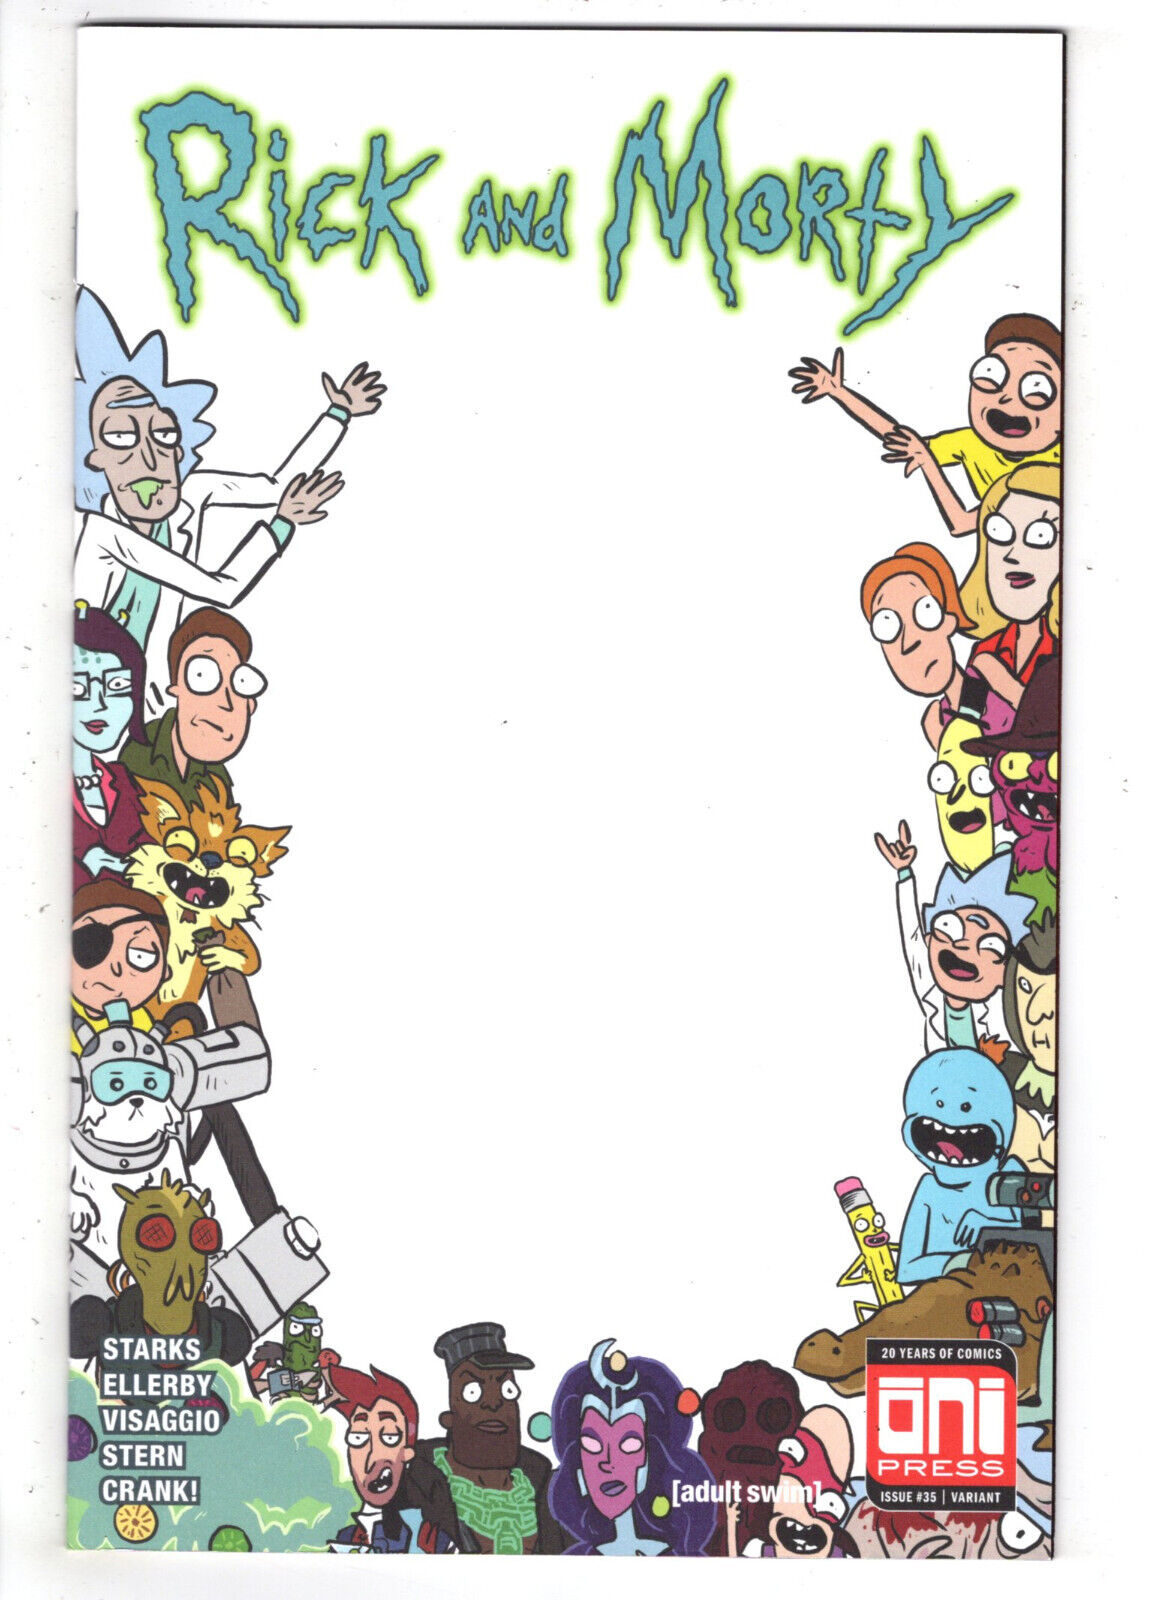 RICK AND MORTY #35 (2018) - GRADE NM - SCORPION COMICS EXCLUSIVE BLANK VARIANT